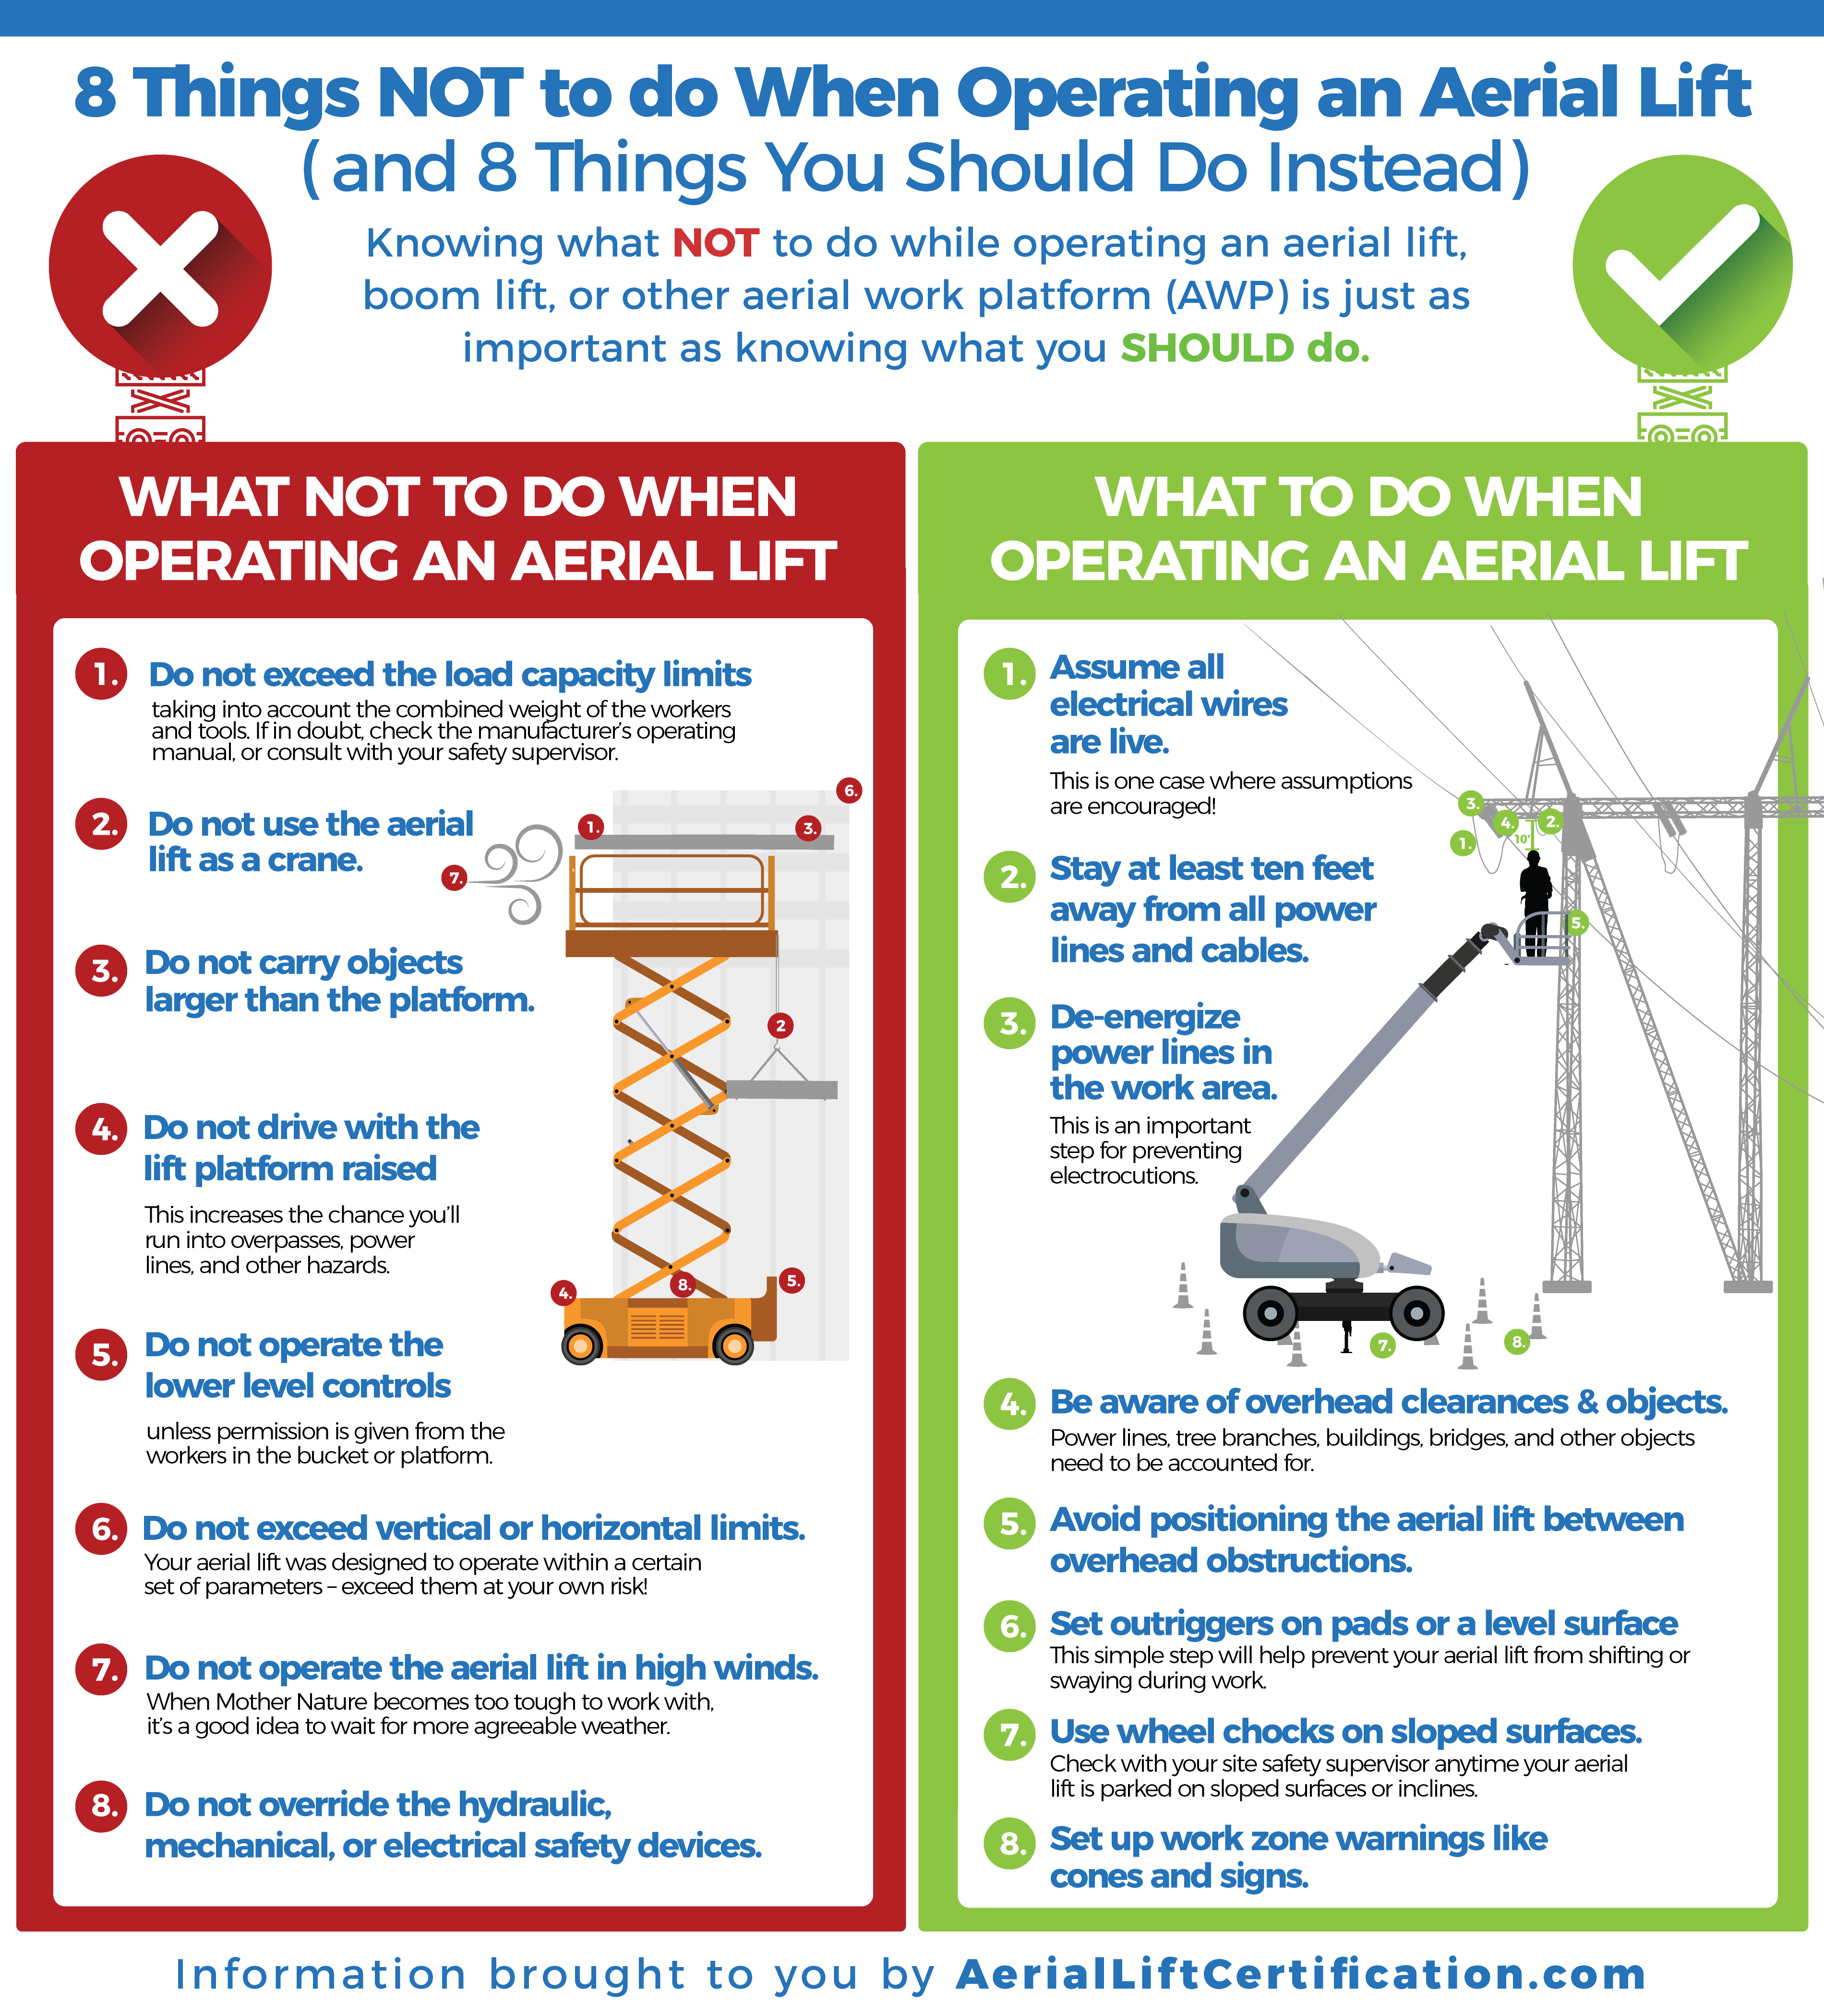 dos and don'ts of operating an aerial lift